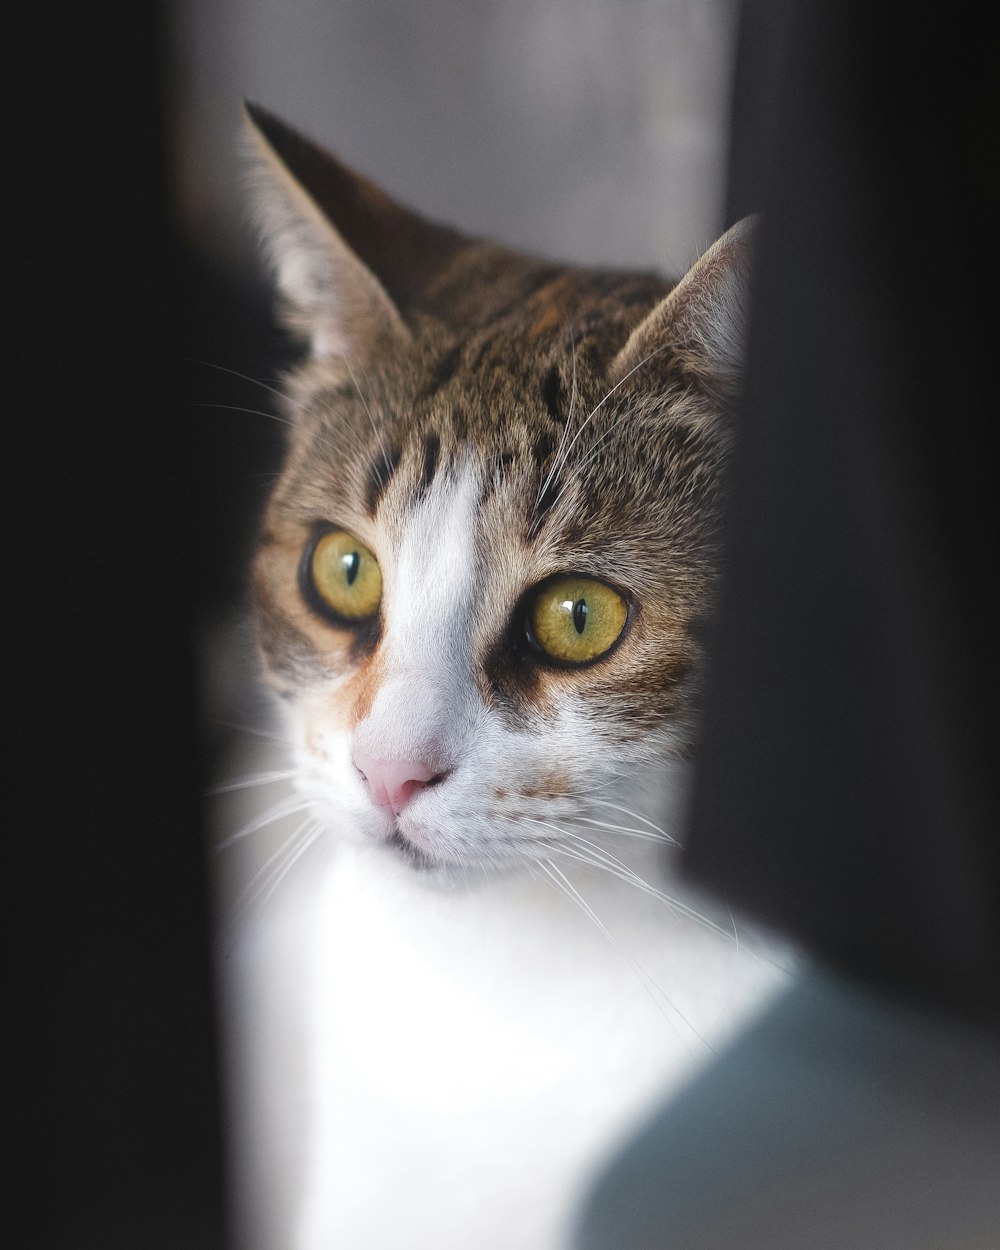 a close up of a cat looking out of a window